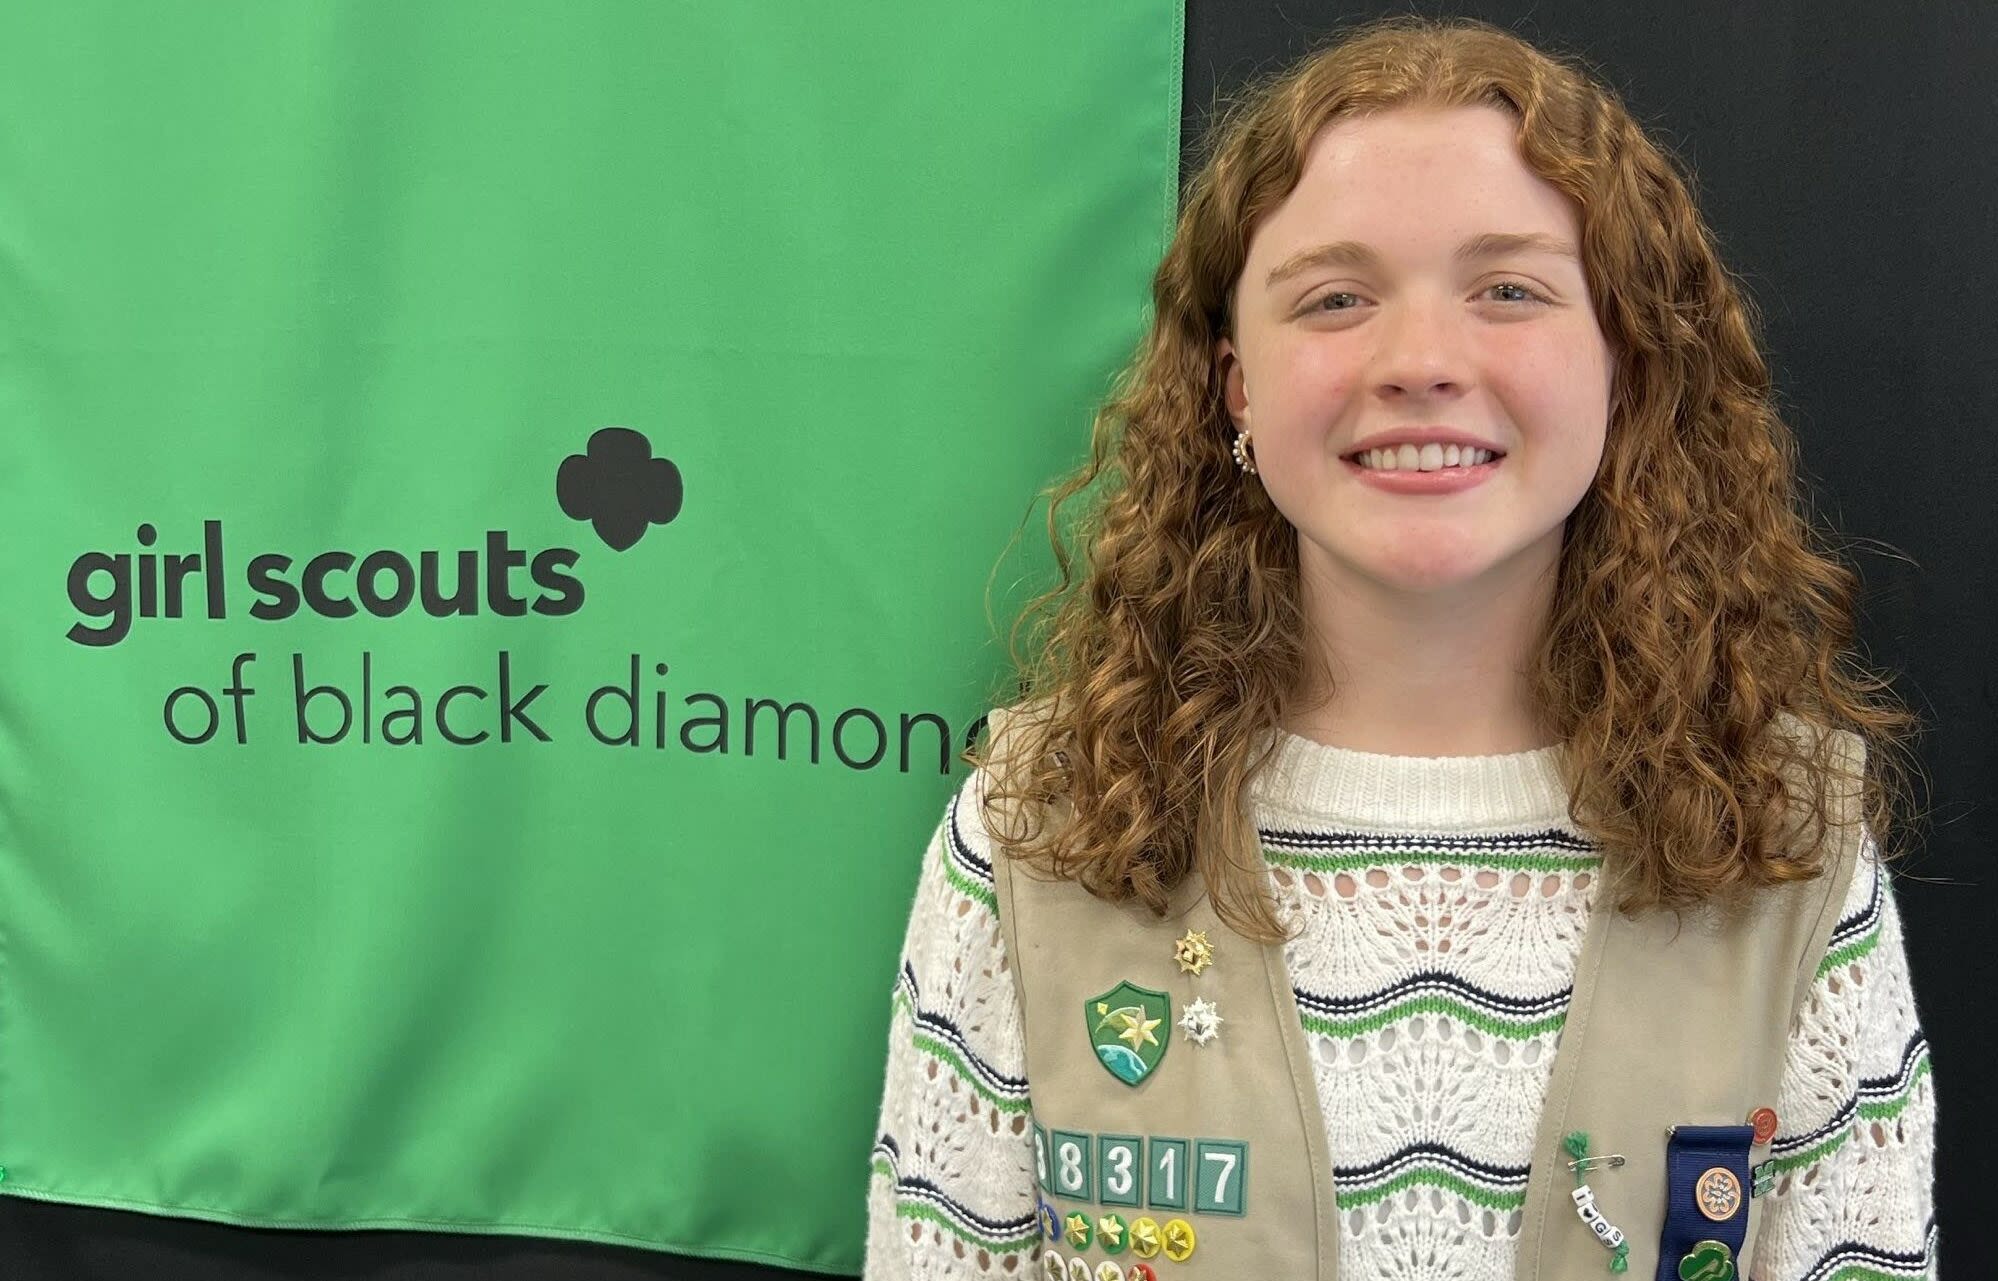 Hurricane high schooler honored with Gold Award, highest honor in Girl Scouts - WV MetroNews